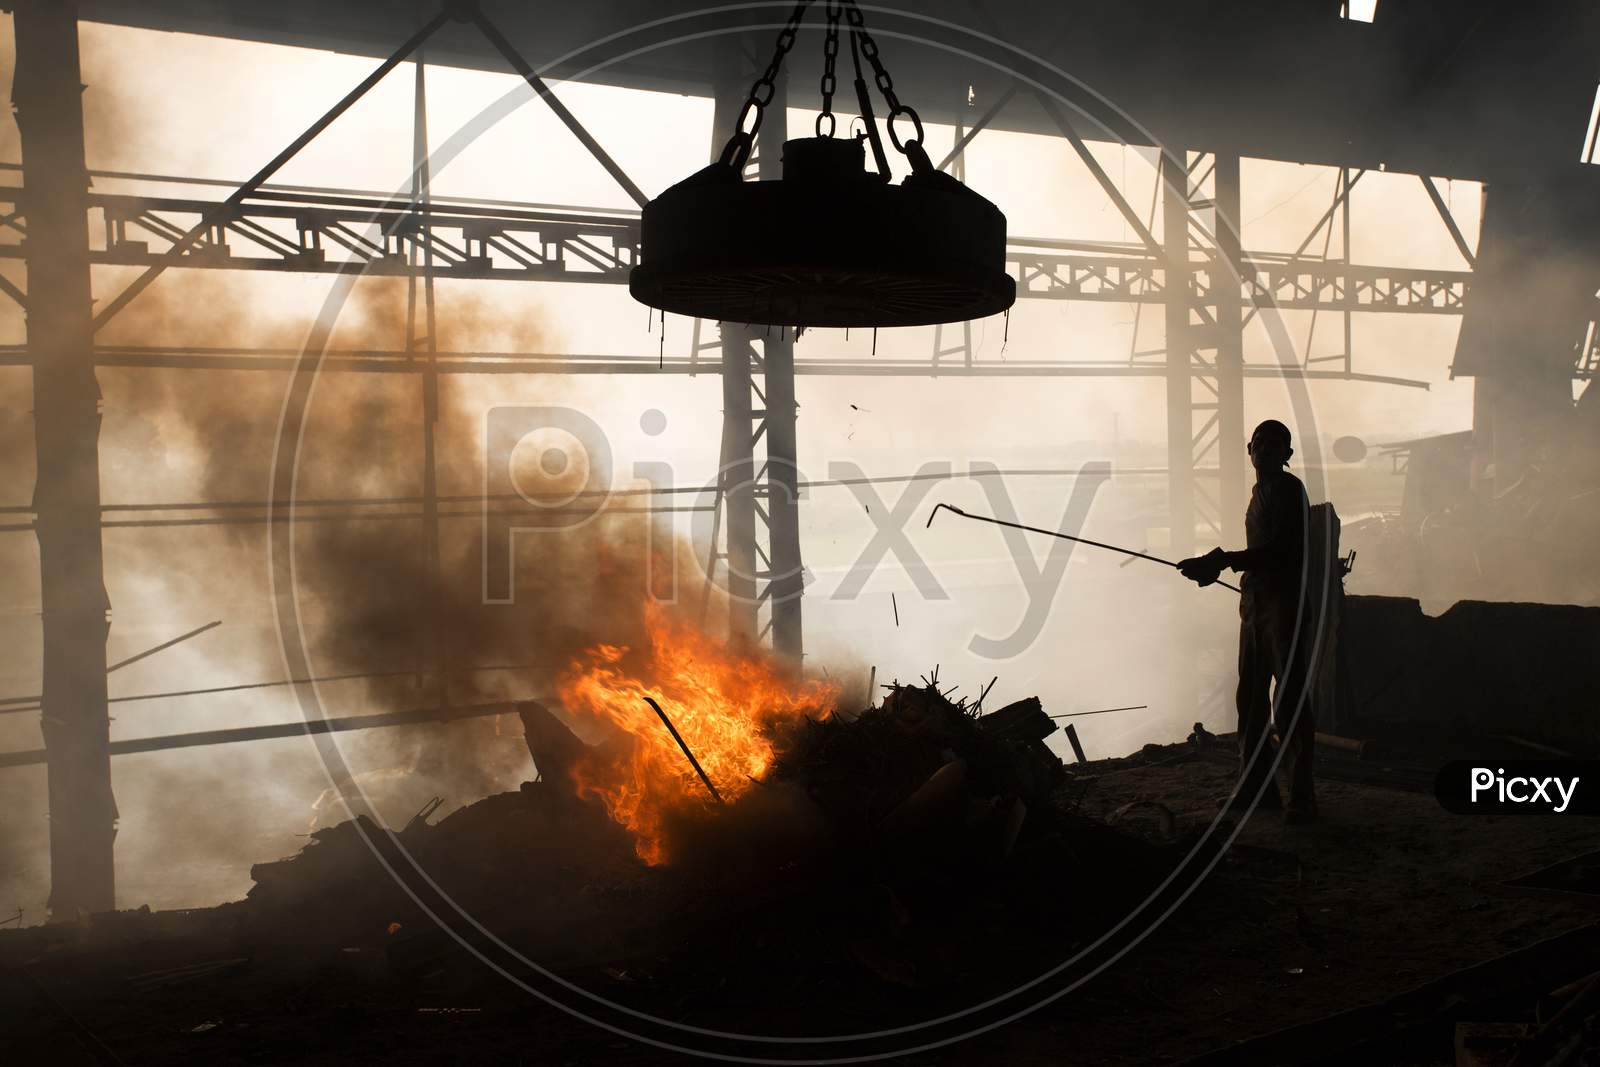 Workers Melt Metal Scraps In The Furnace Of A Steel Mill To Produce Rods In Demra, Dhaka, Bangladesh.